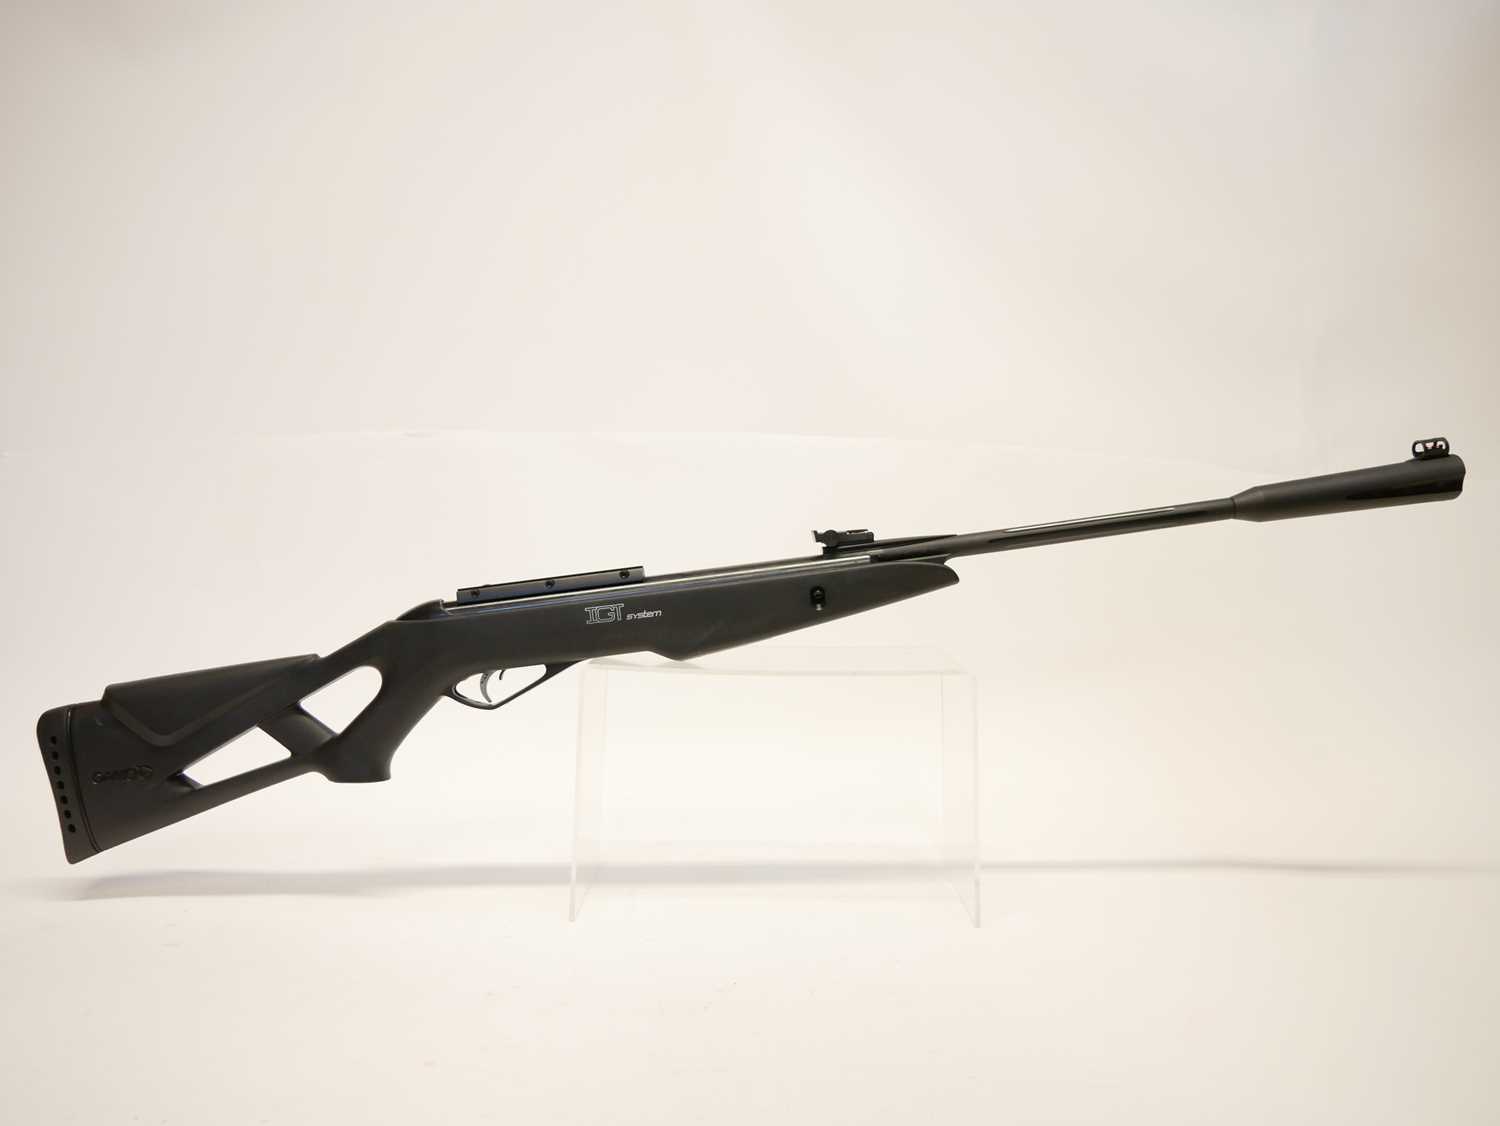 Gamo Whisper IGT system .22 air rifle, serial number 04-1C-520098-14, 20.5inch sighted barrel, black - Image 2 of 10